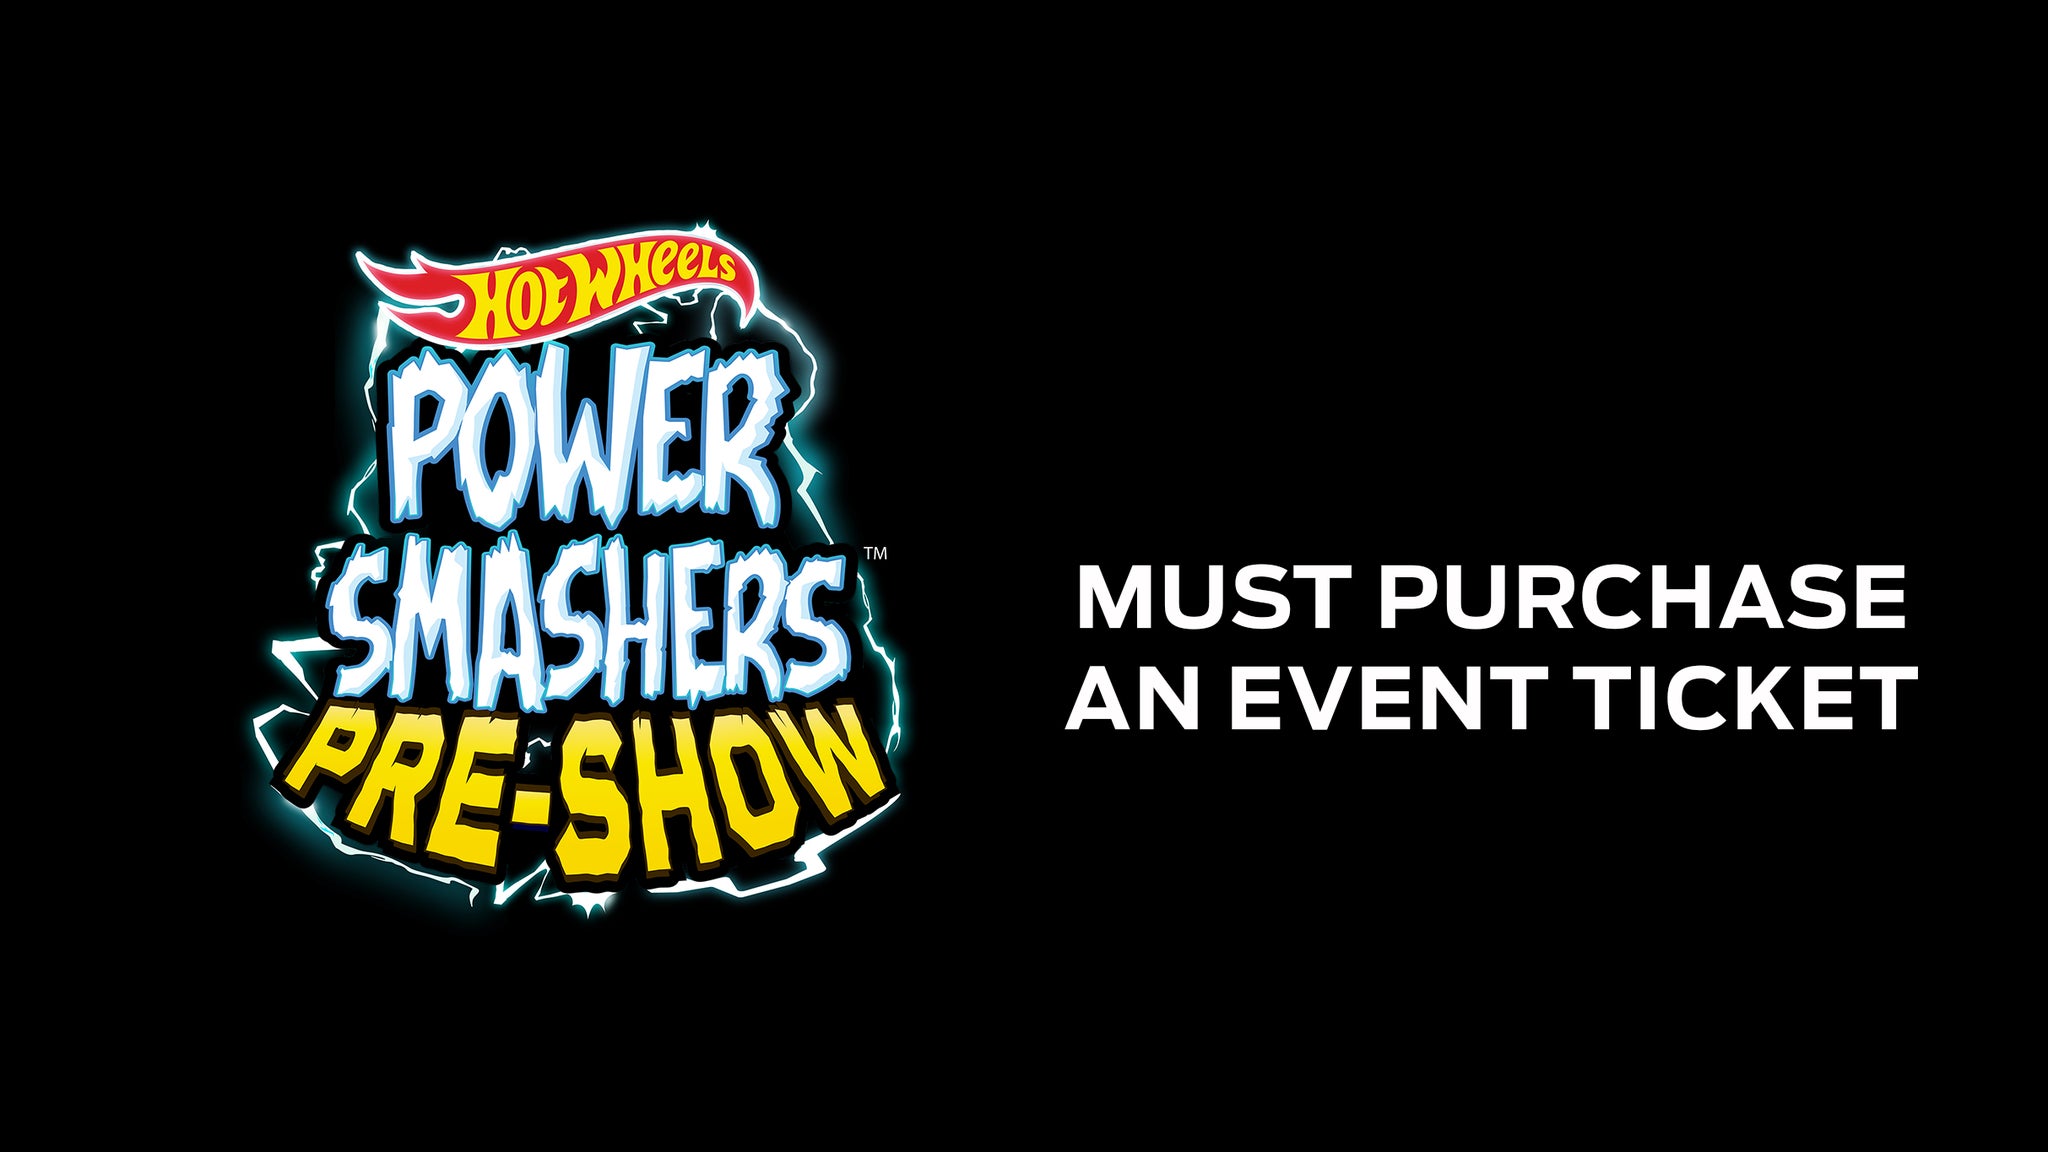 Hot Wheels Power Smashers Pre-Show starts at 10am